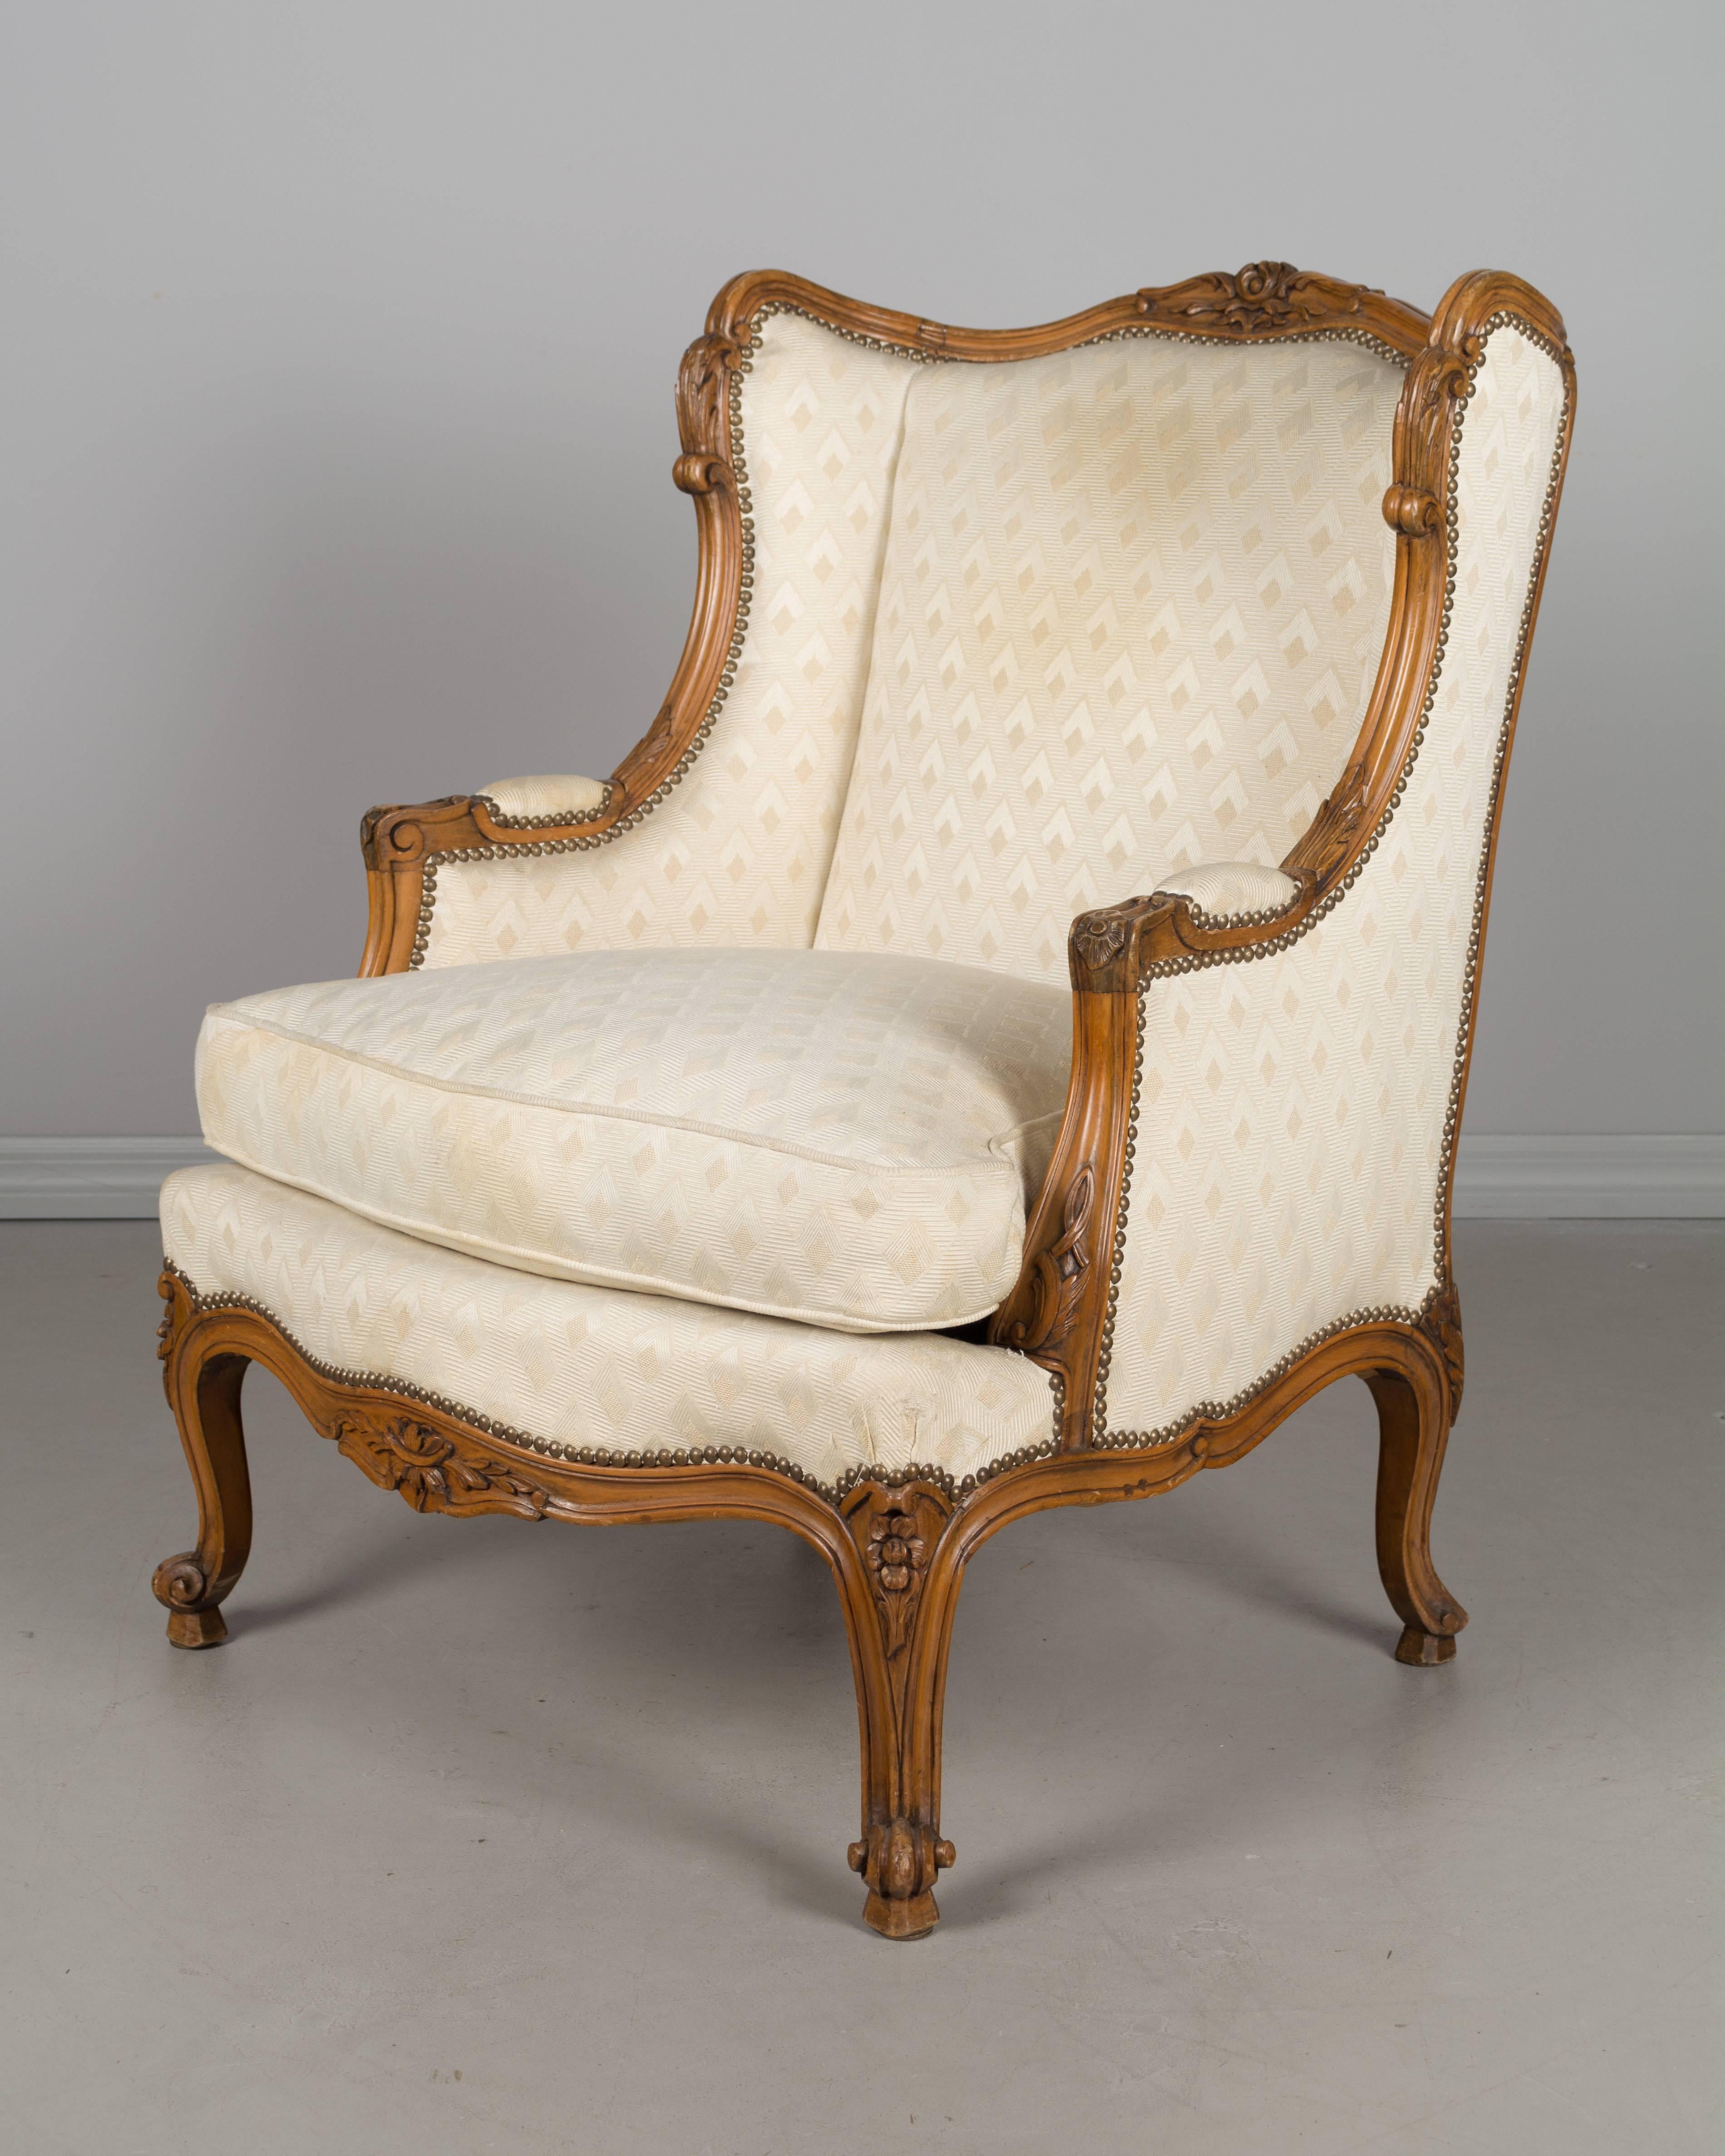 A pair of French Louis XV style bergere, or arm chairs, made of beechwood with carved details. Sturdy and very high quality with comfortable seating. Original worn upholstery with down seat cushion with some stain.
More photos available upon